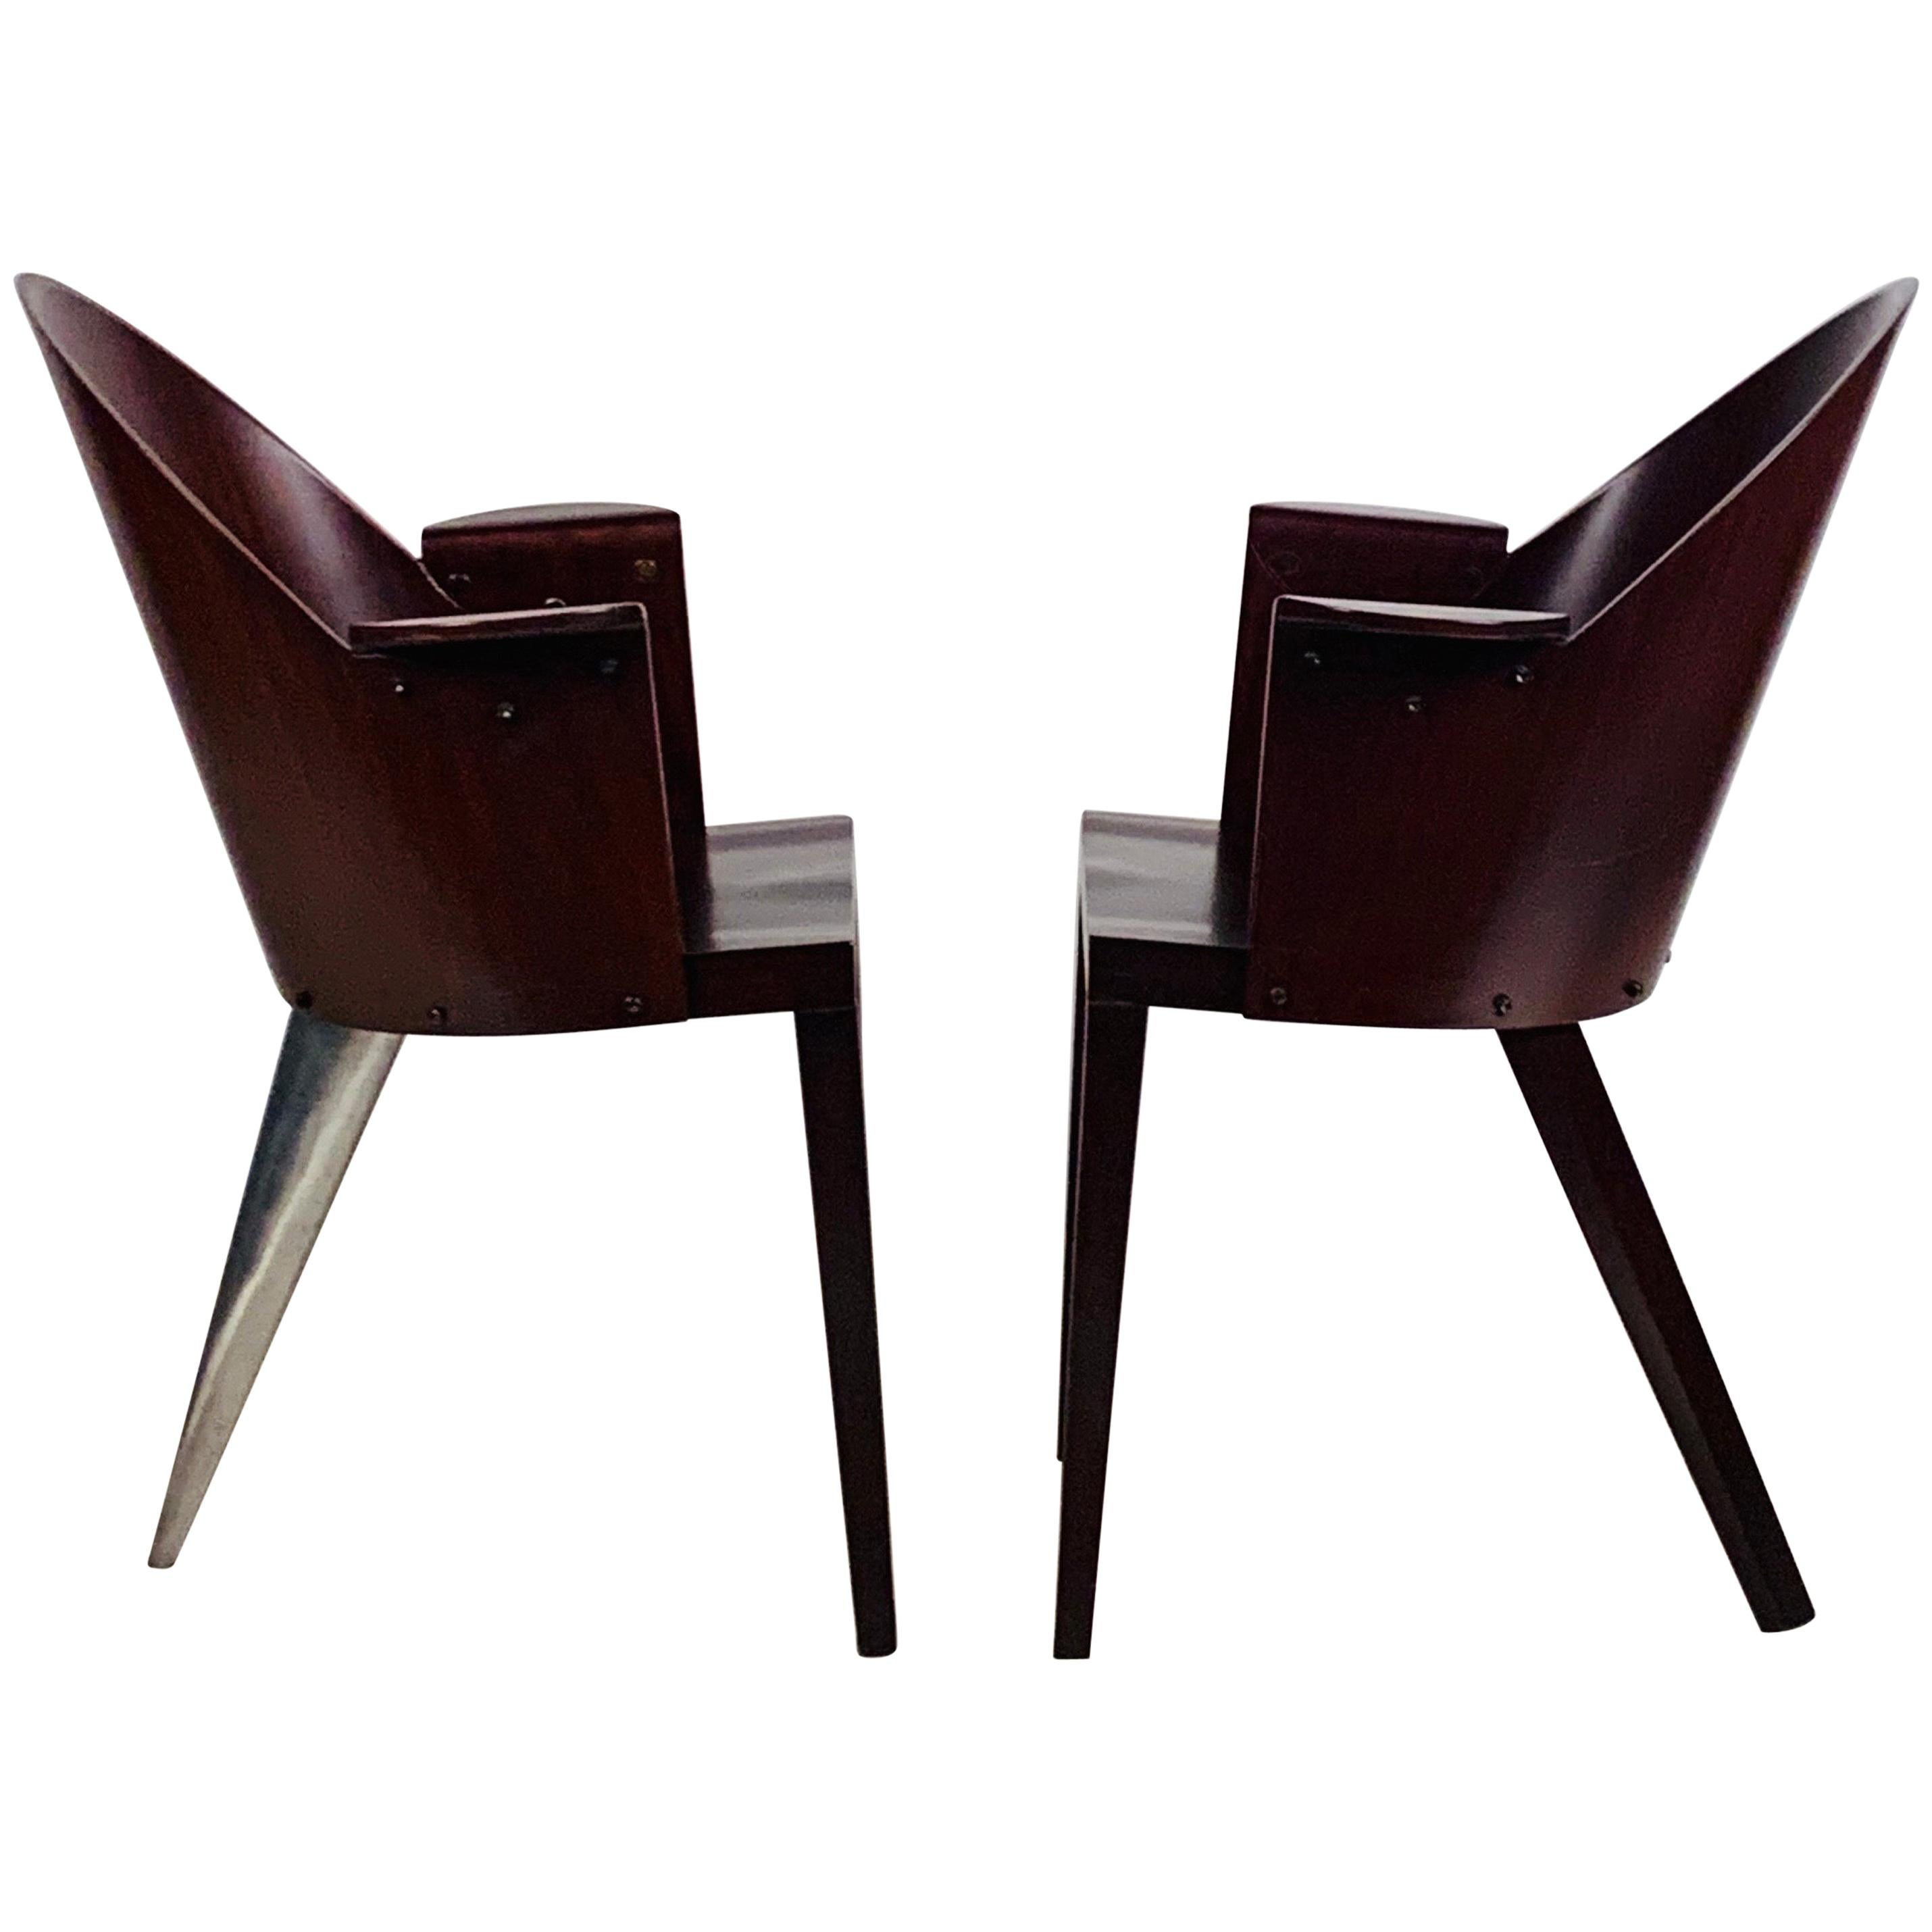 Rare Pair of Philippe Starck Armchairs from the Royalton Hotel, NYC For Sale